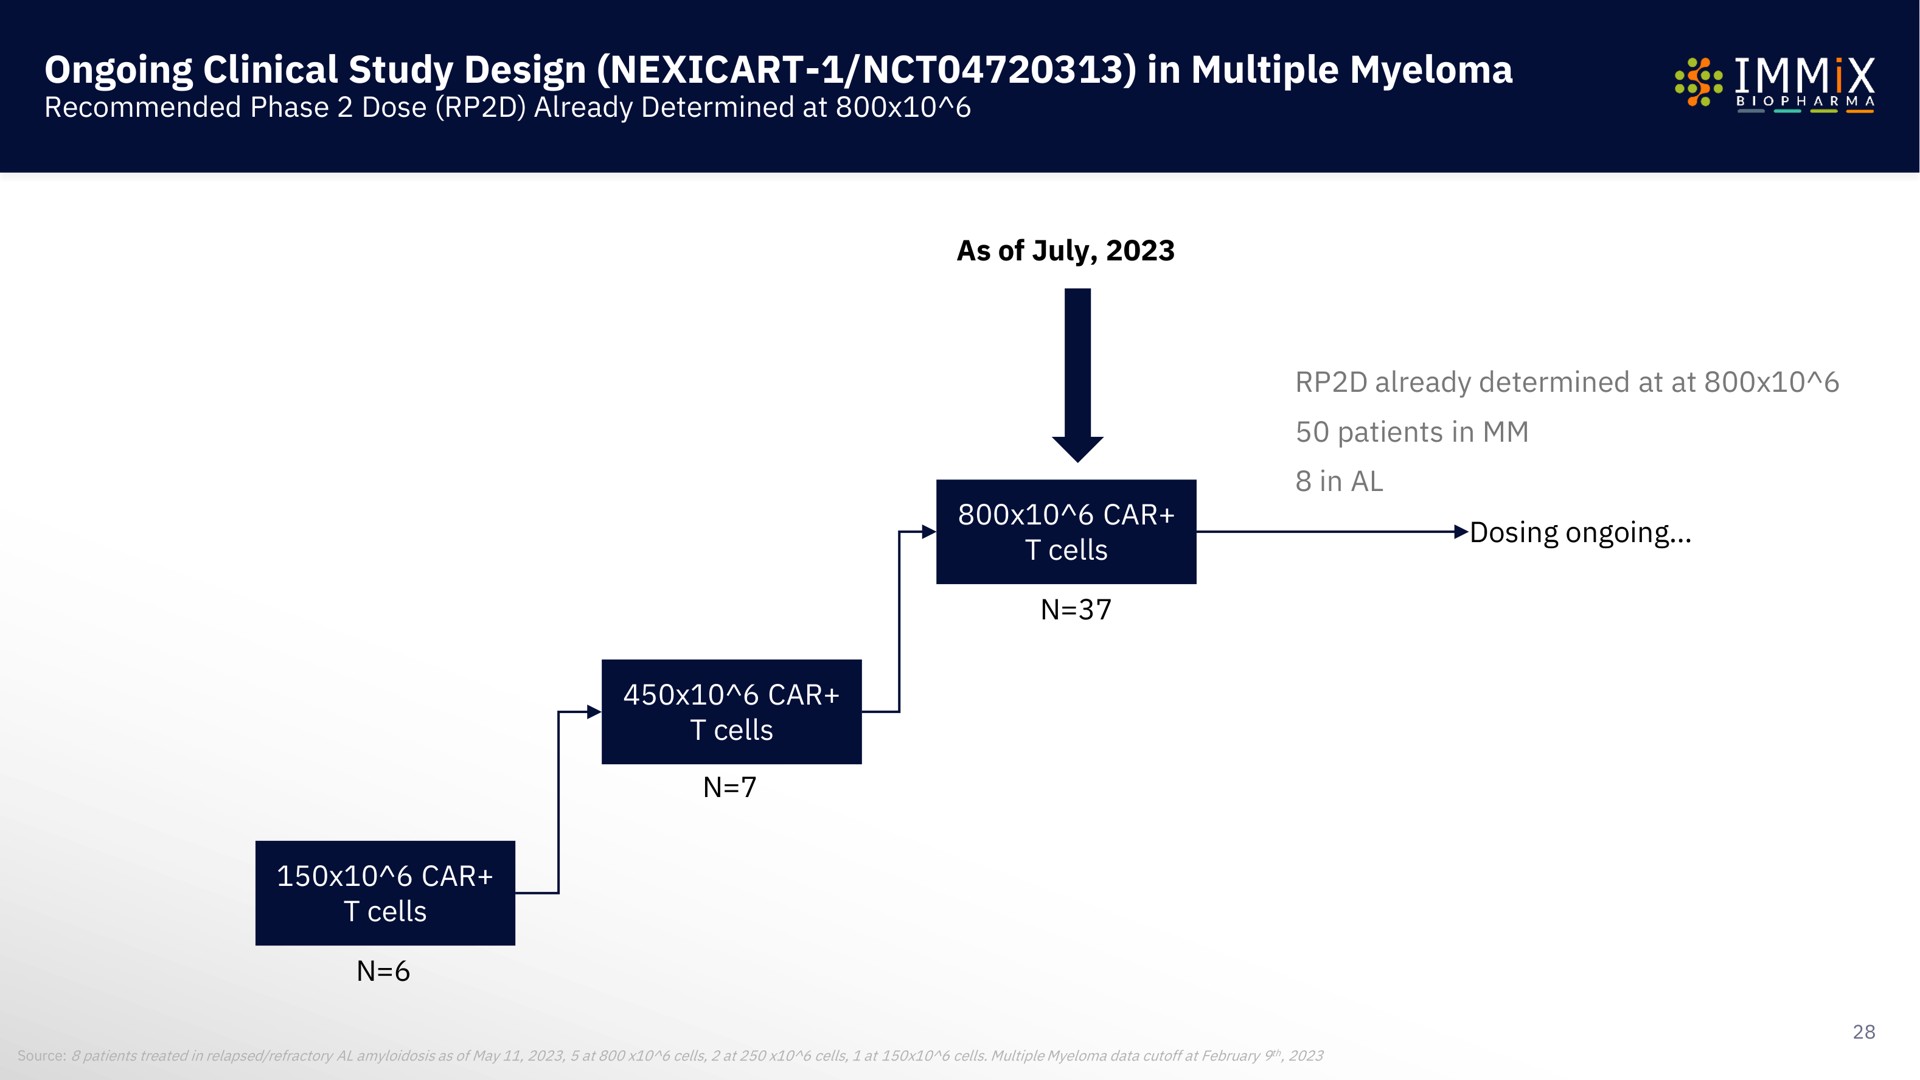 ongoing clinical study design in multiple myeloma | Immix Biopharma